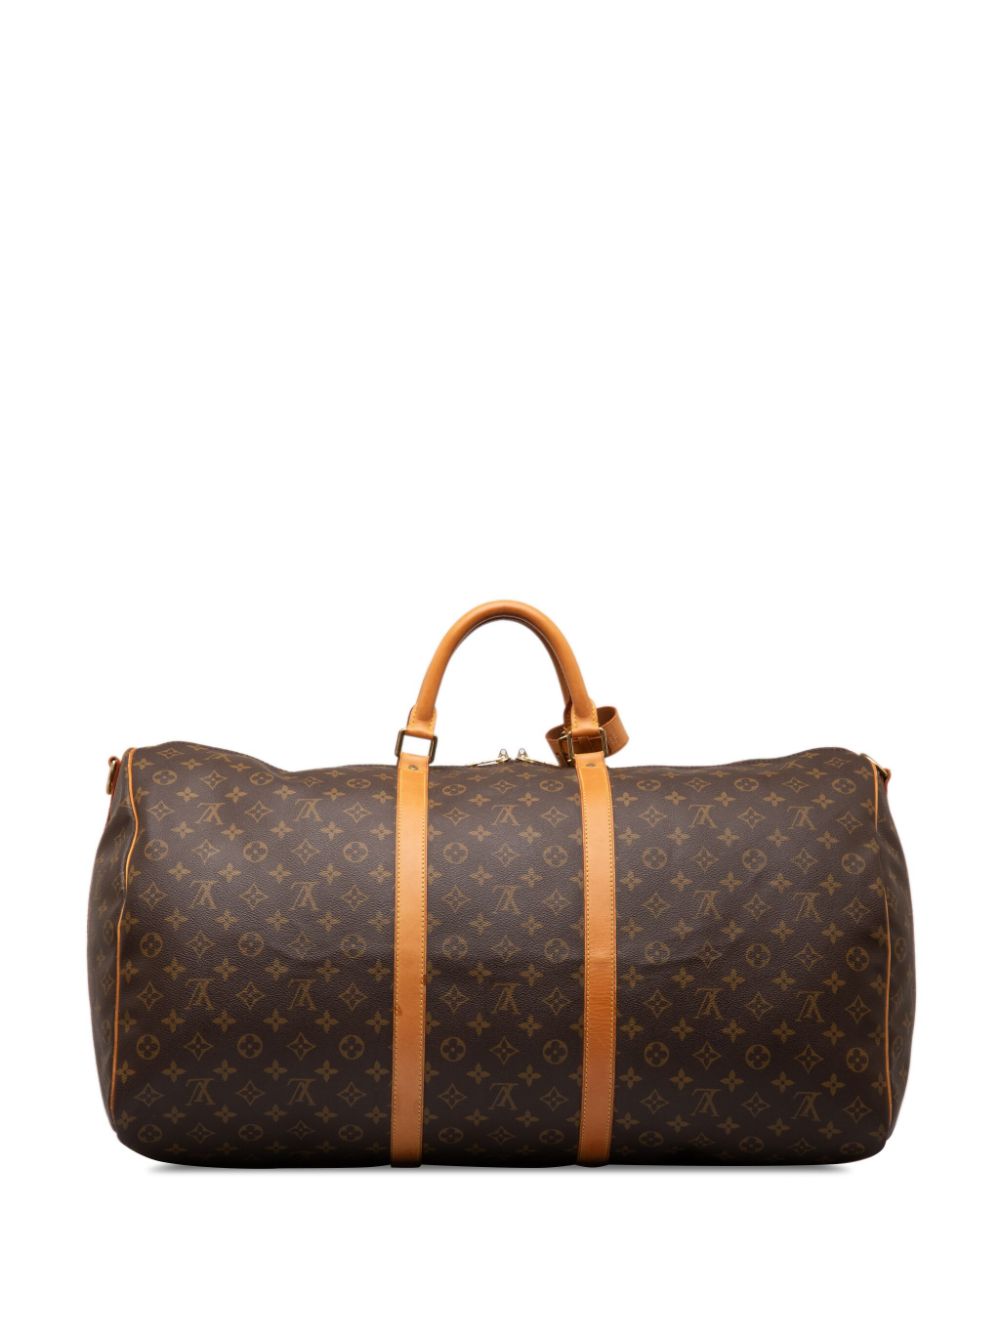 Louis Vuitton Pre-Owned 1995 Monogram Keepall Bandouliere 60 travel bag - Bruin